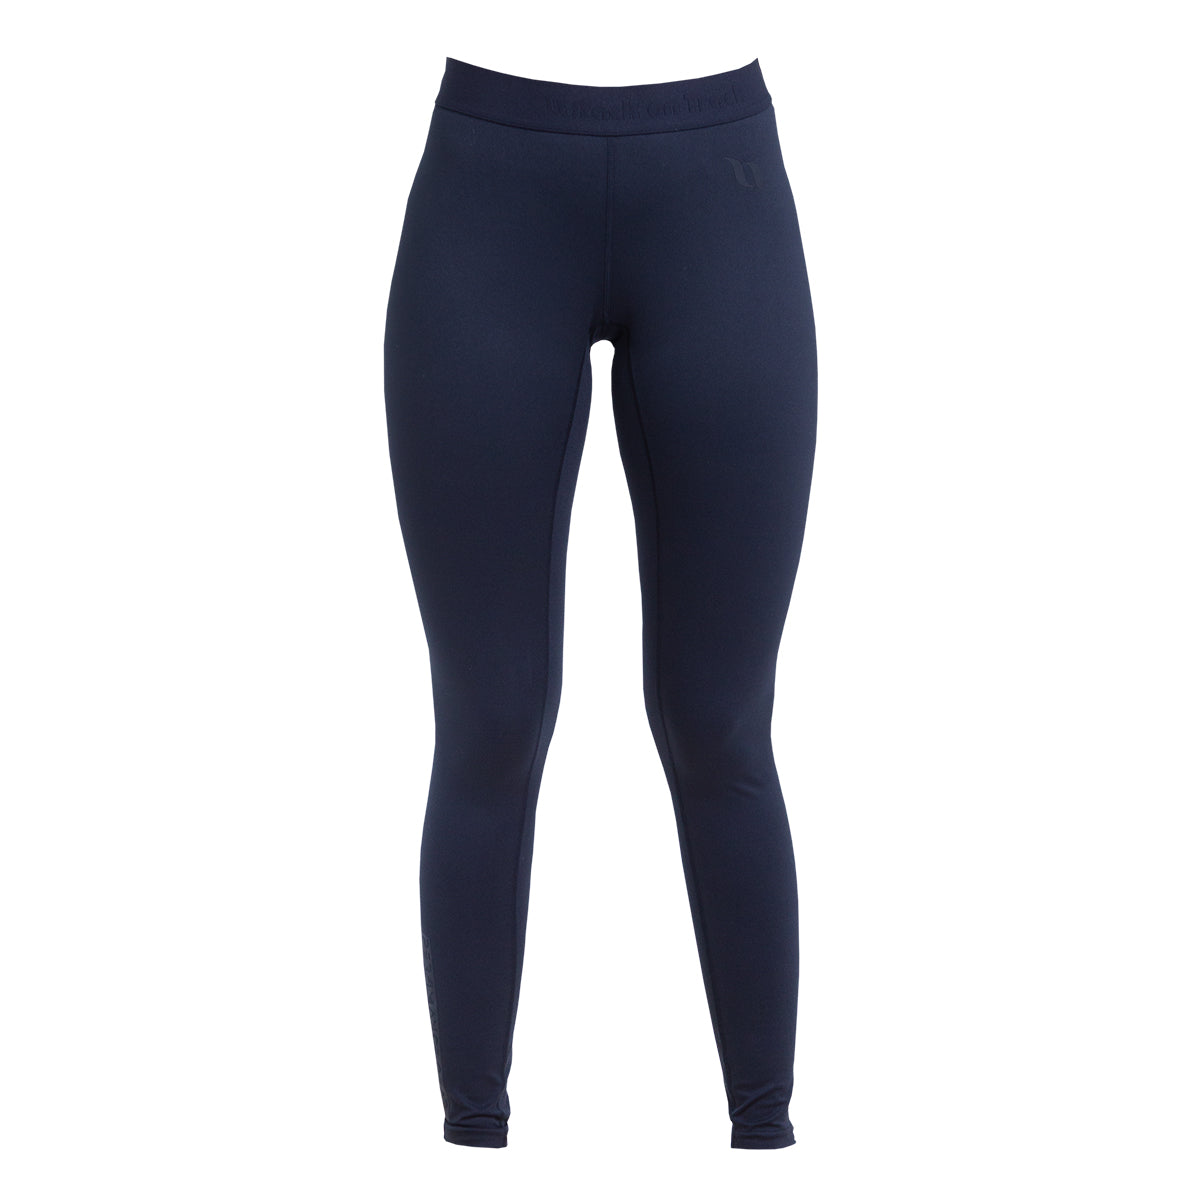 Back on Track® Cate P4G Women’s Tights